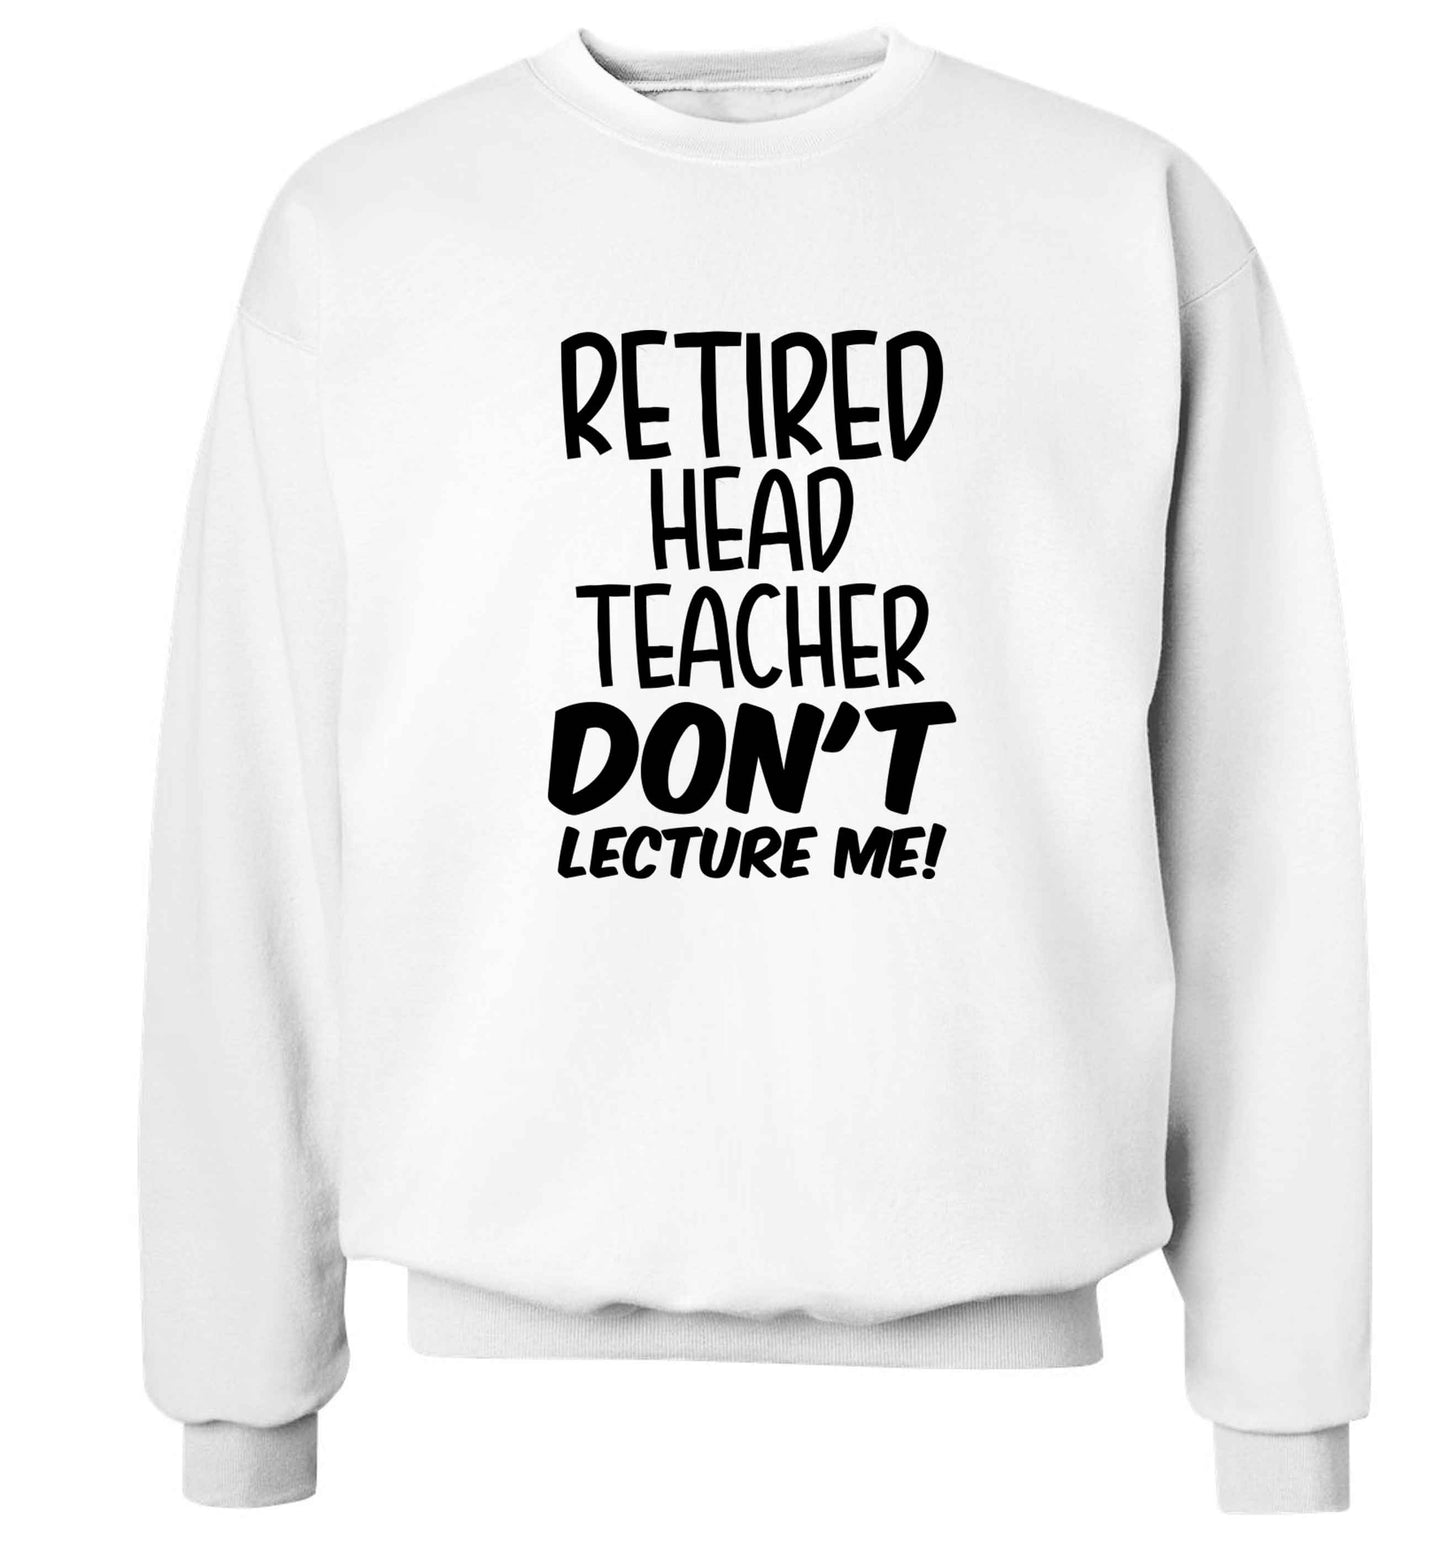 Retired head teacher don't lecture me! Adult's unisex white Sweater 2XL